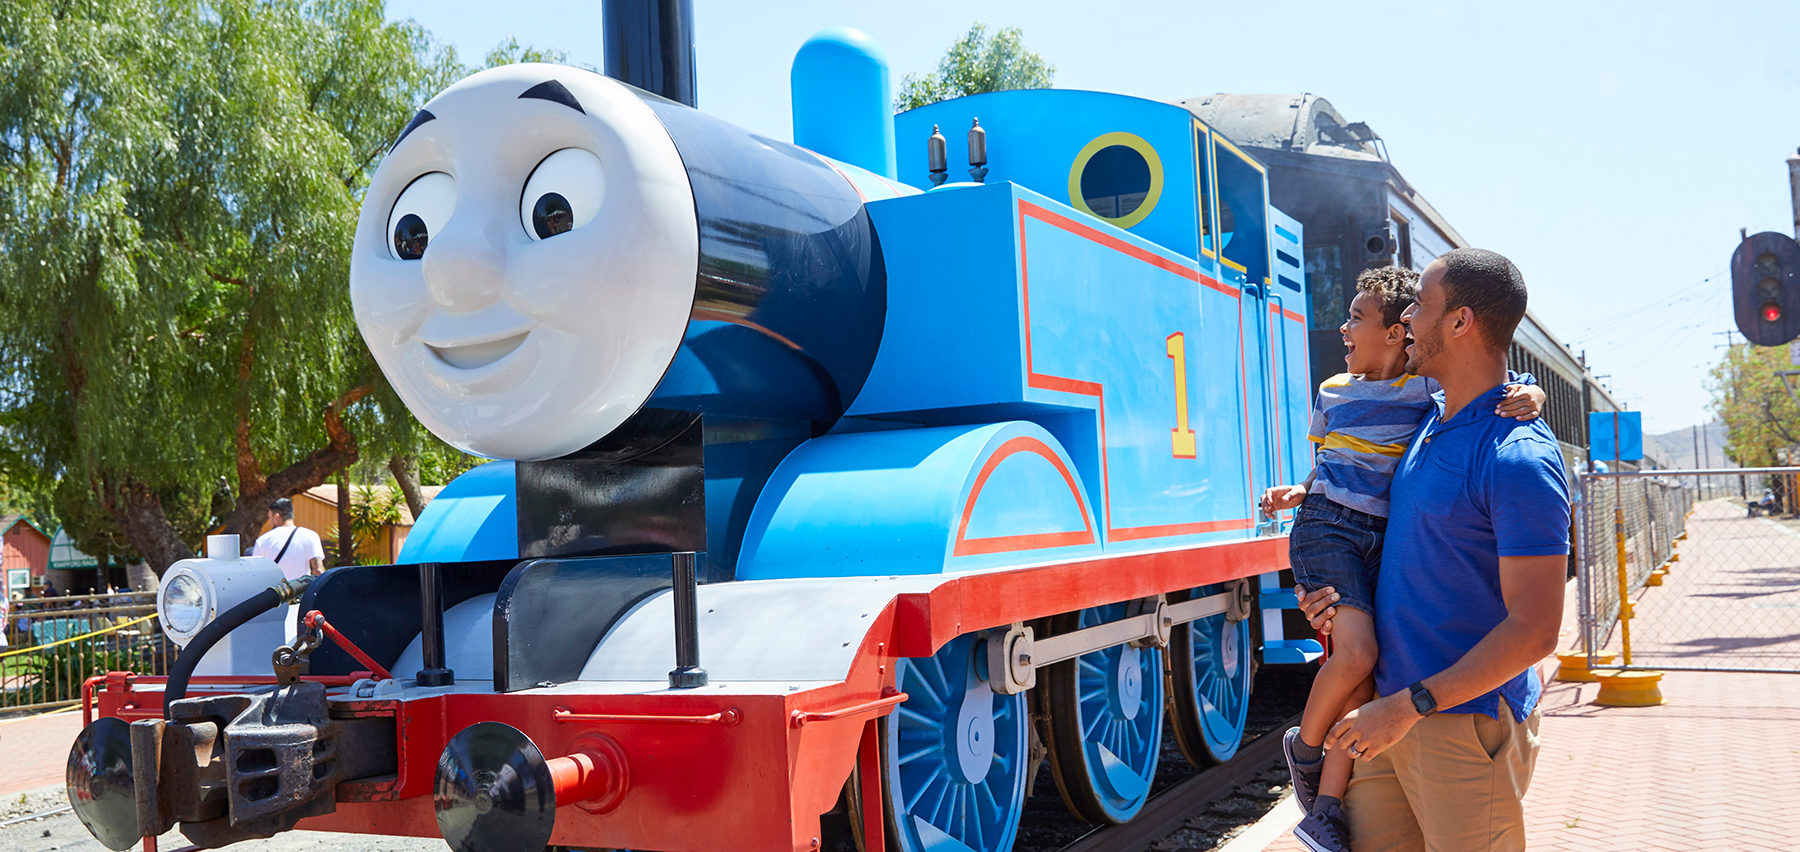 Home - A Day Out With Thomas